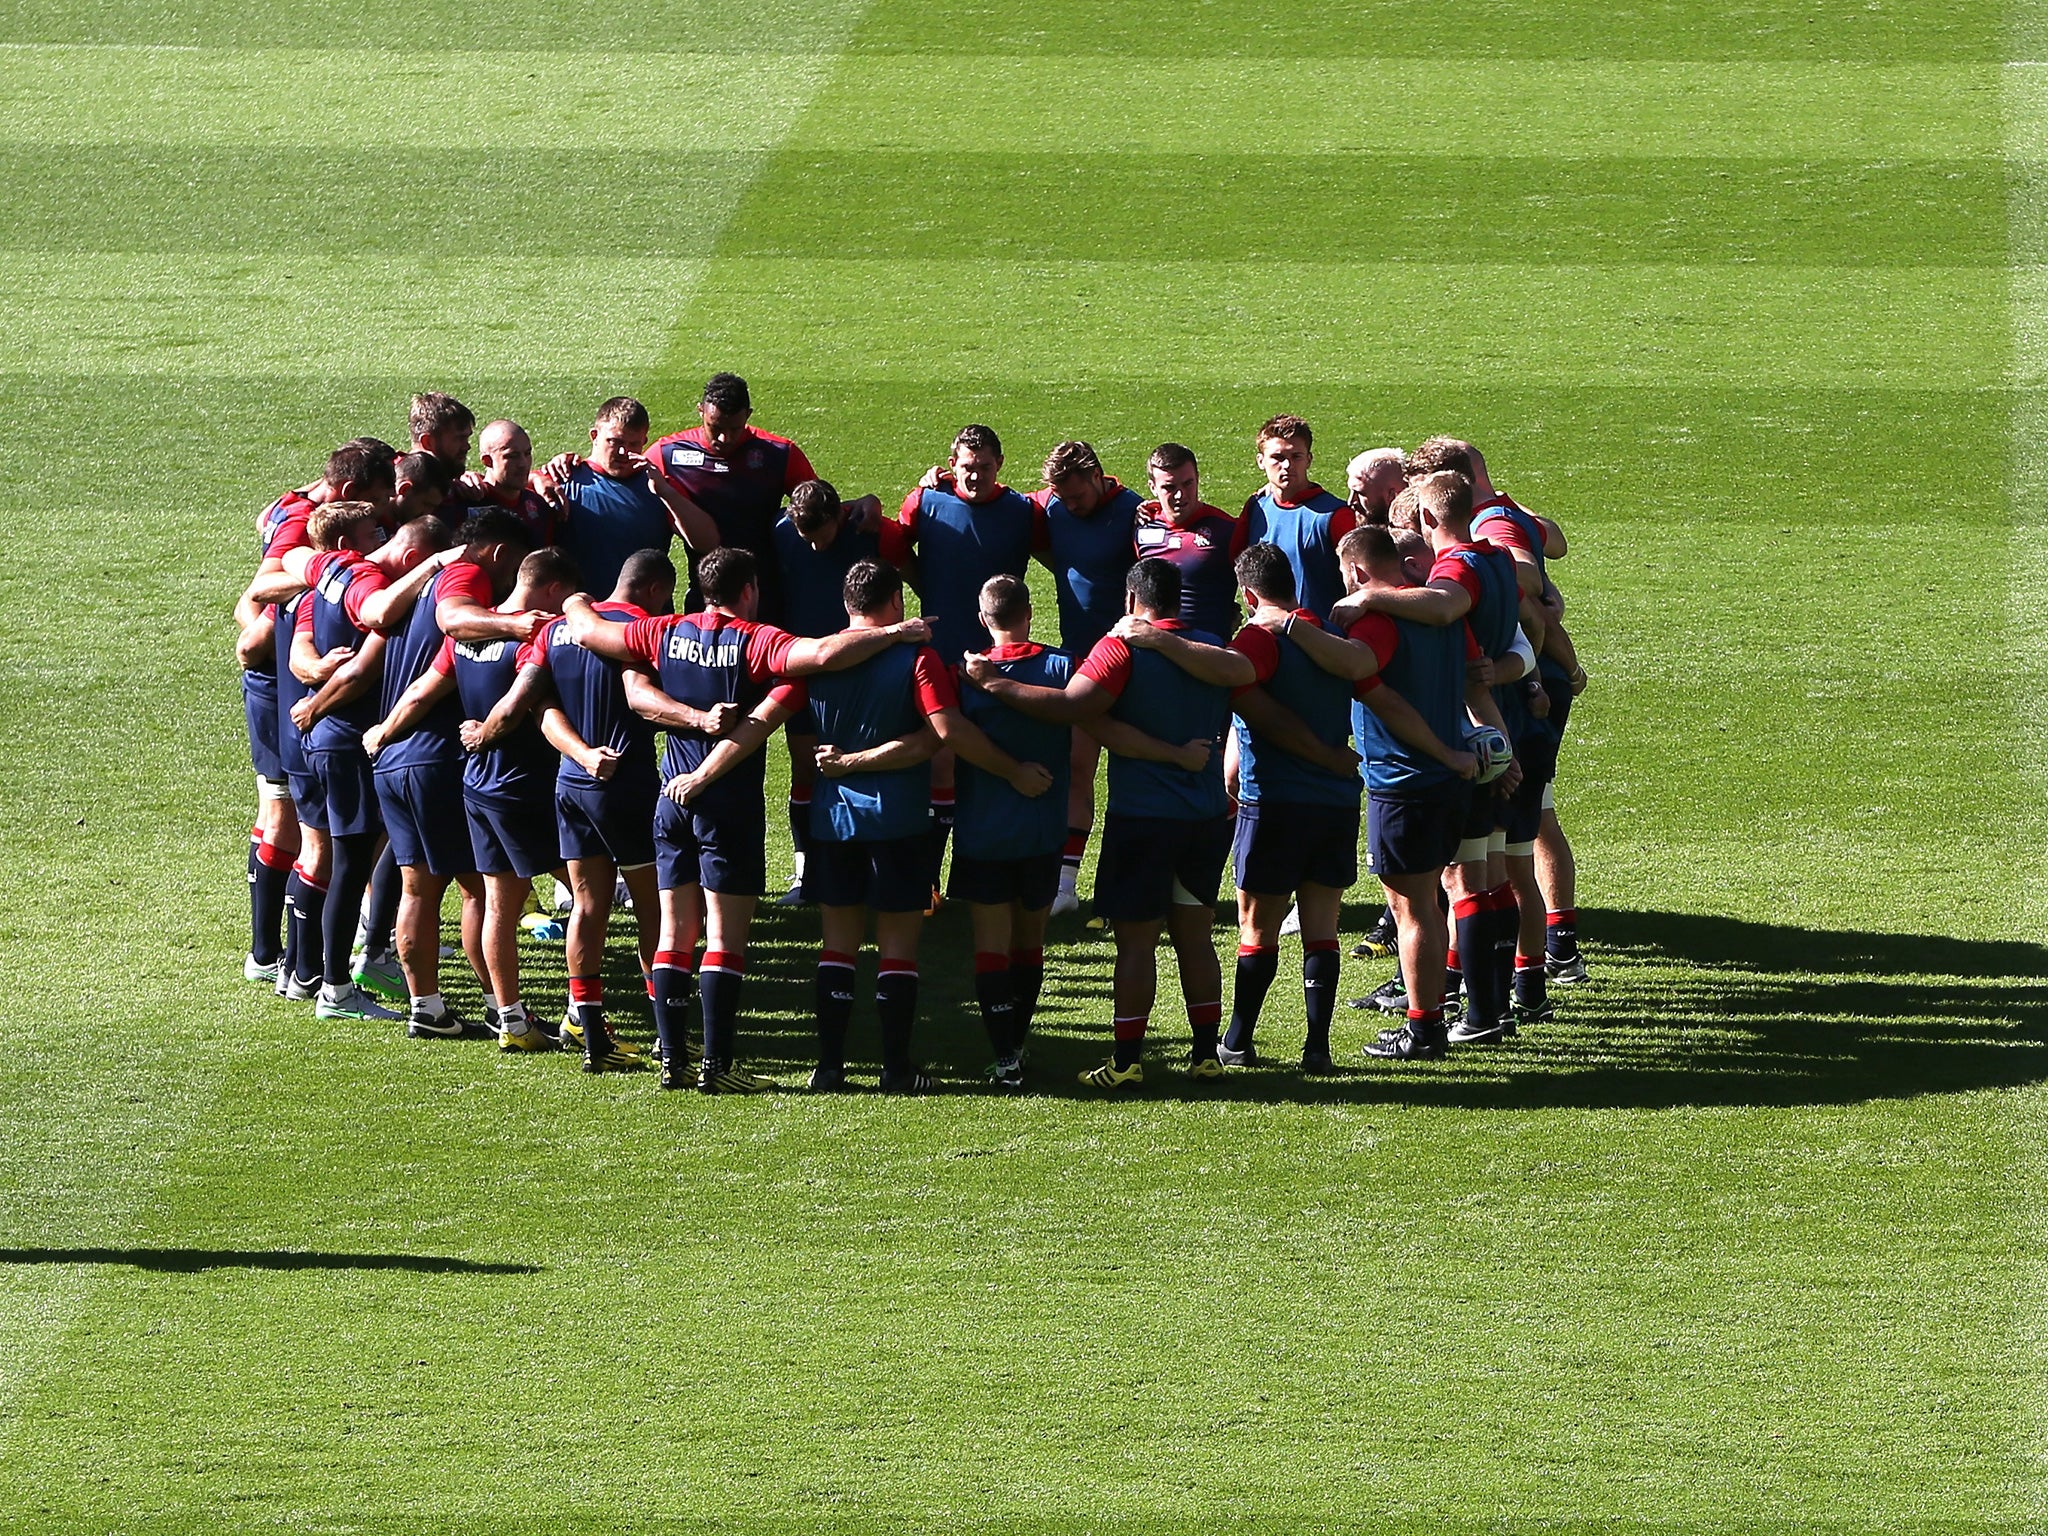 The players’ huddle during the England captain’s run at Twickenham yesterday